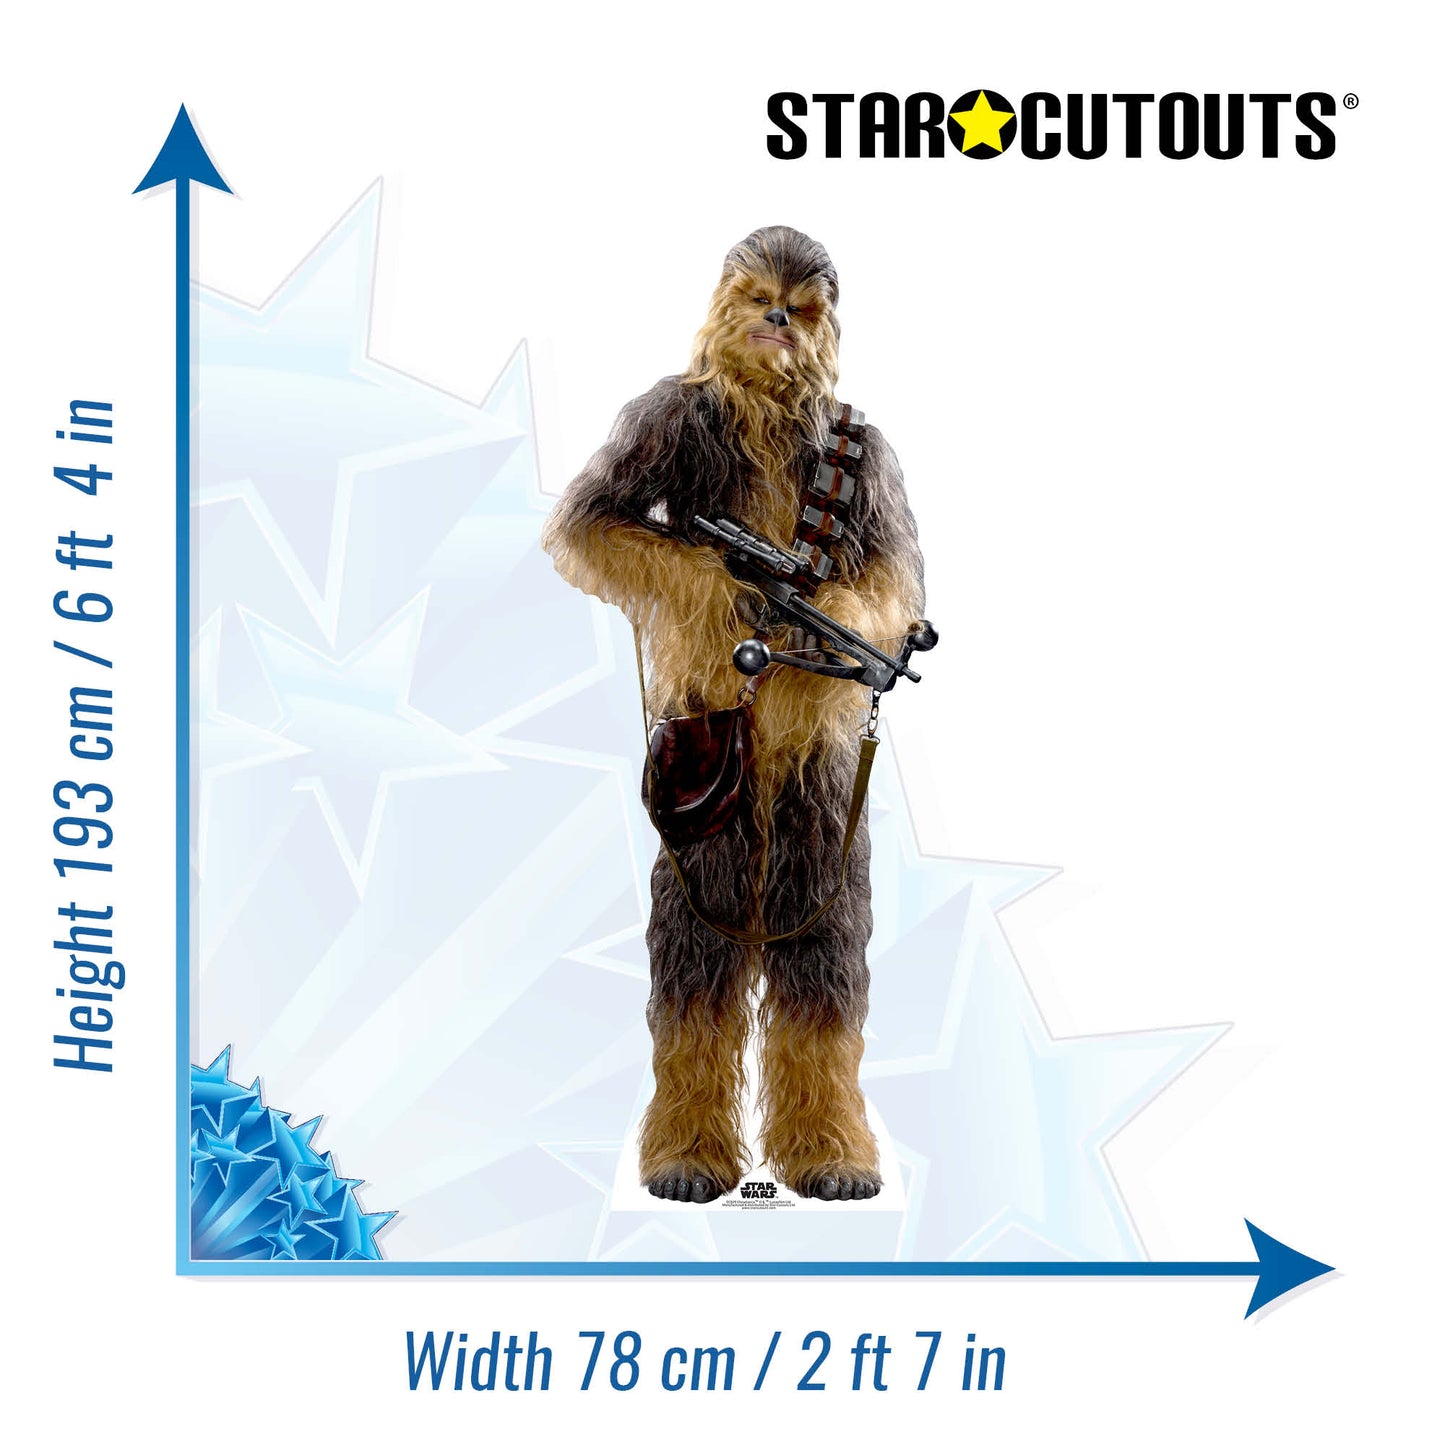 Chewbacca Star Wars The Force Awakens Cardboard Cut Out Height 193cm